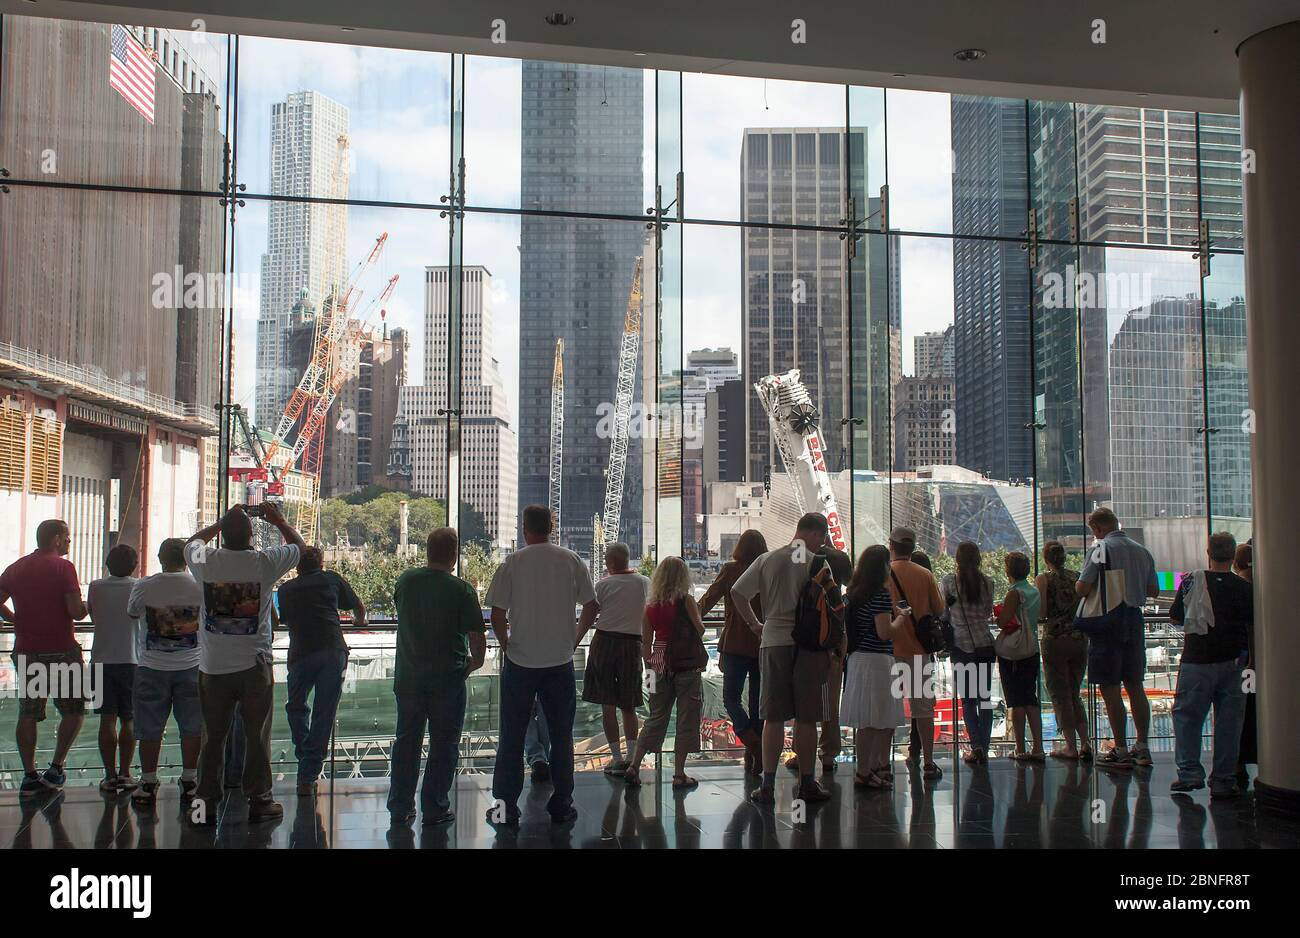 People look on during construction of One World Trade Center, Financial District, Manhattan, New York, USA Stock Photo